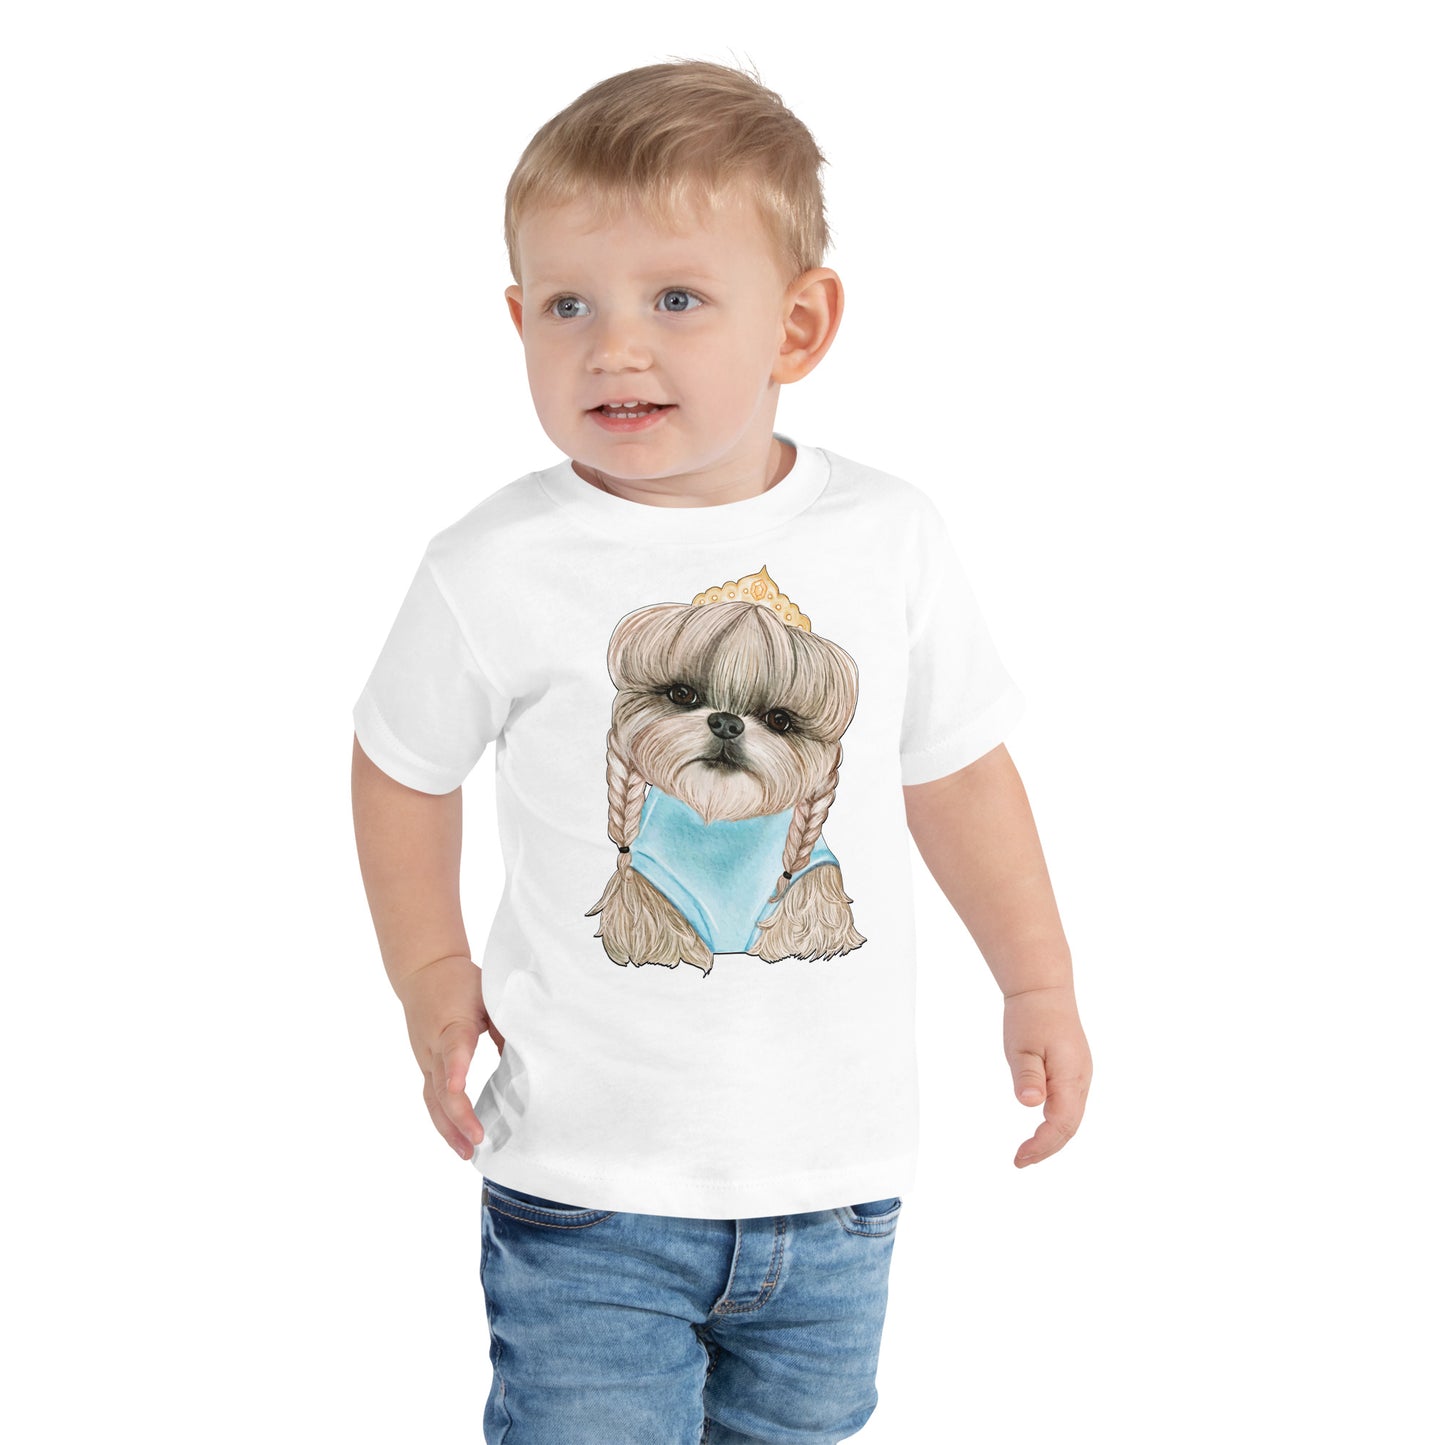 Adorable Dog with Hair Braids Crowns T-shirt, No. 0563